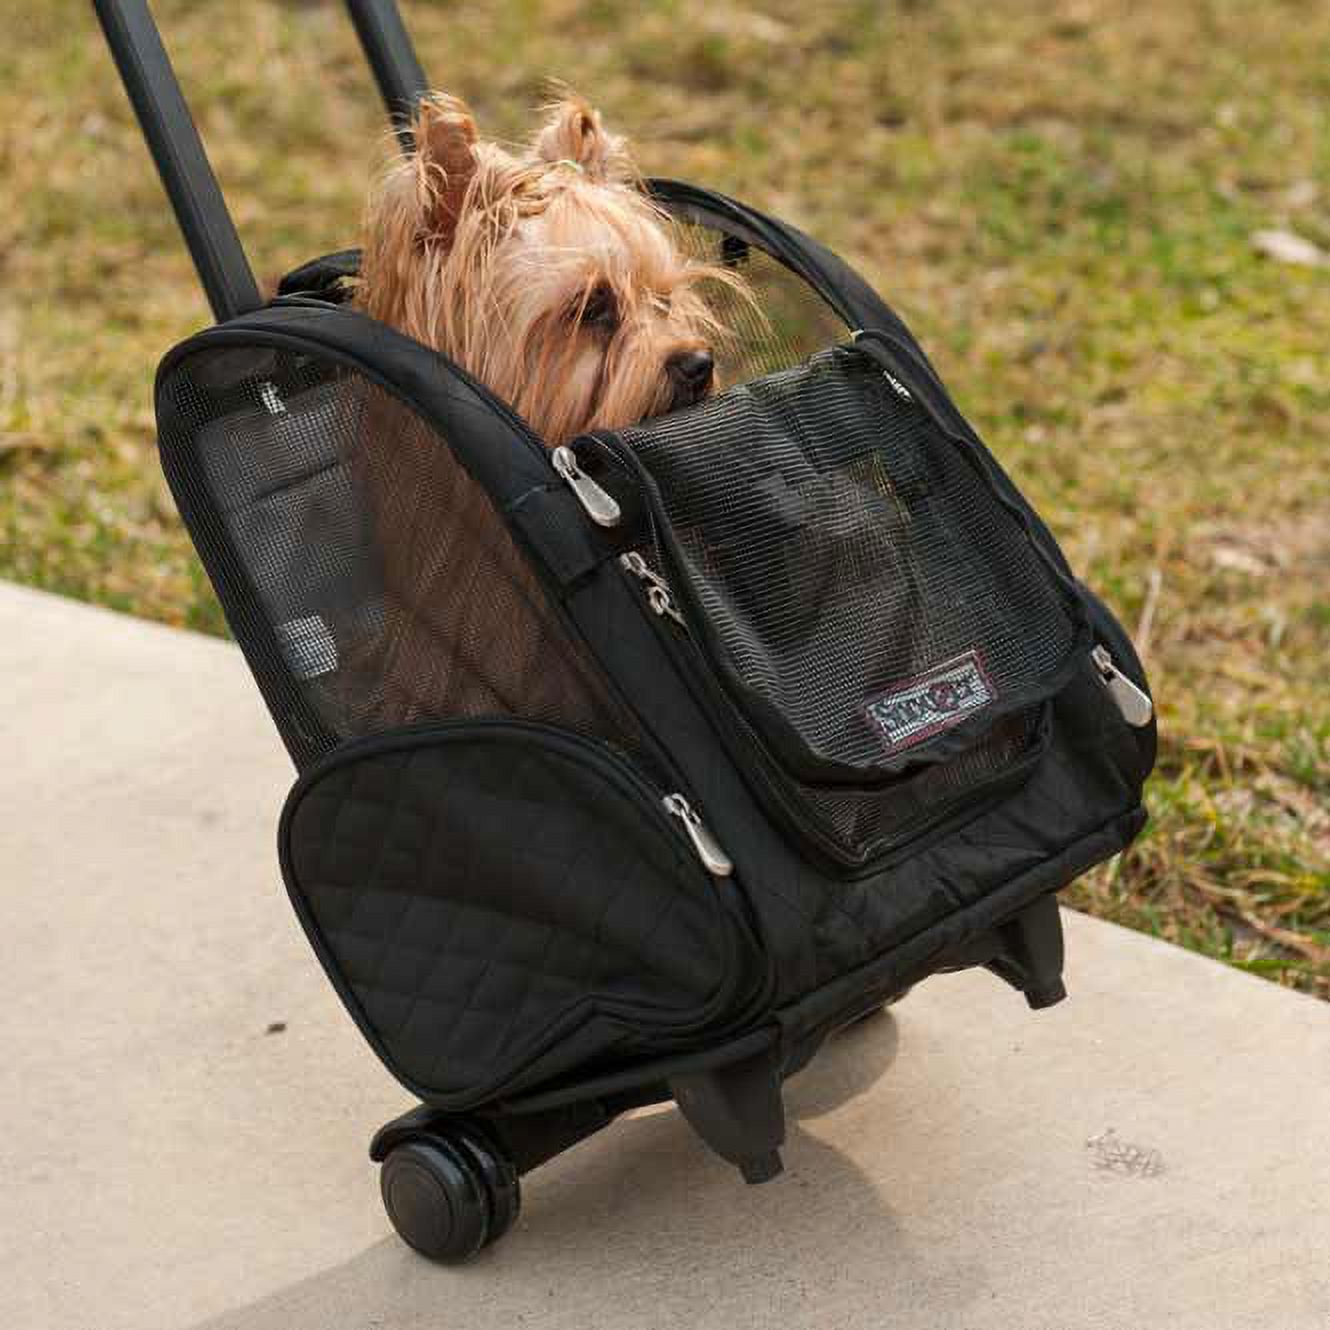 Snoozer Roll Around Travel Dog Carrier Backpack 4-in-1 - image 2 of 8